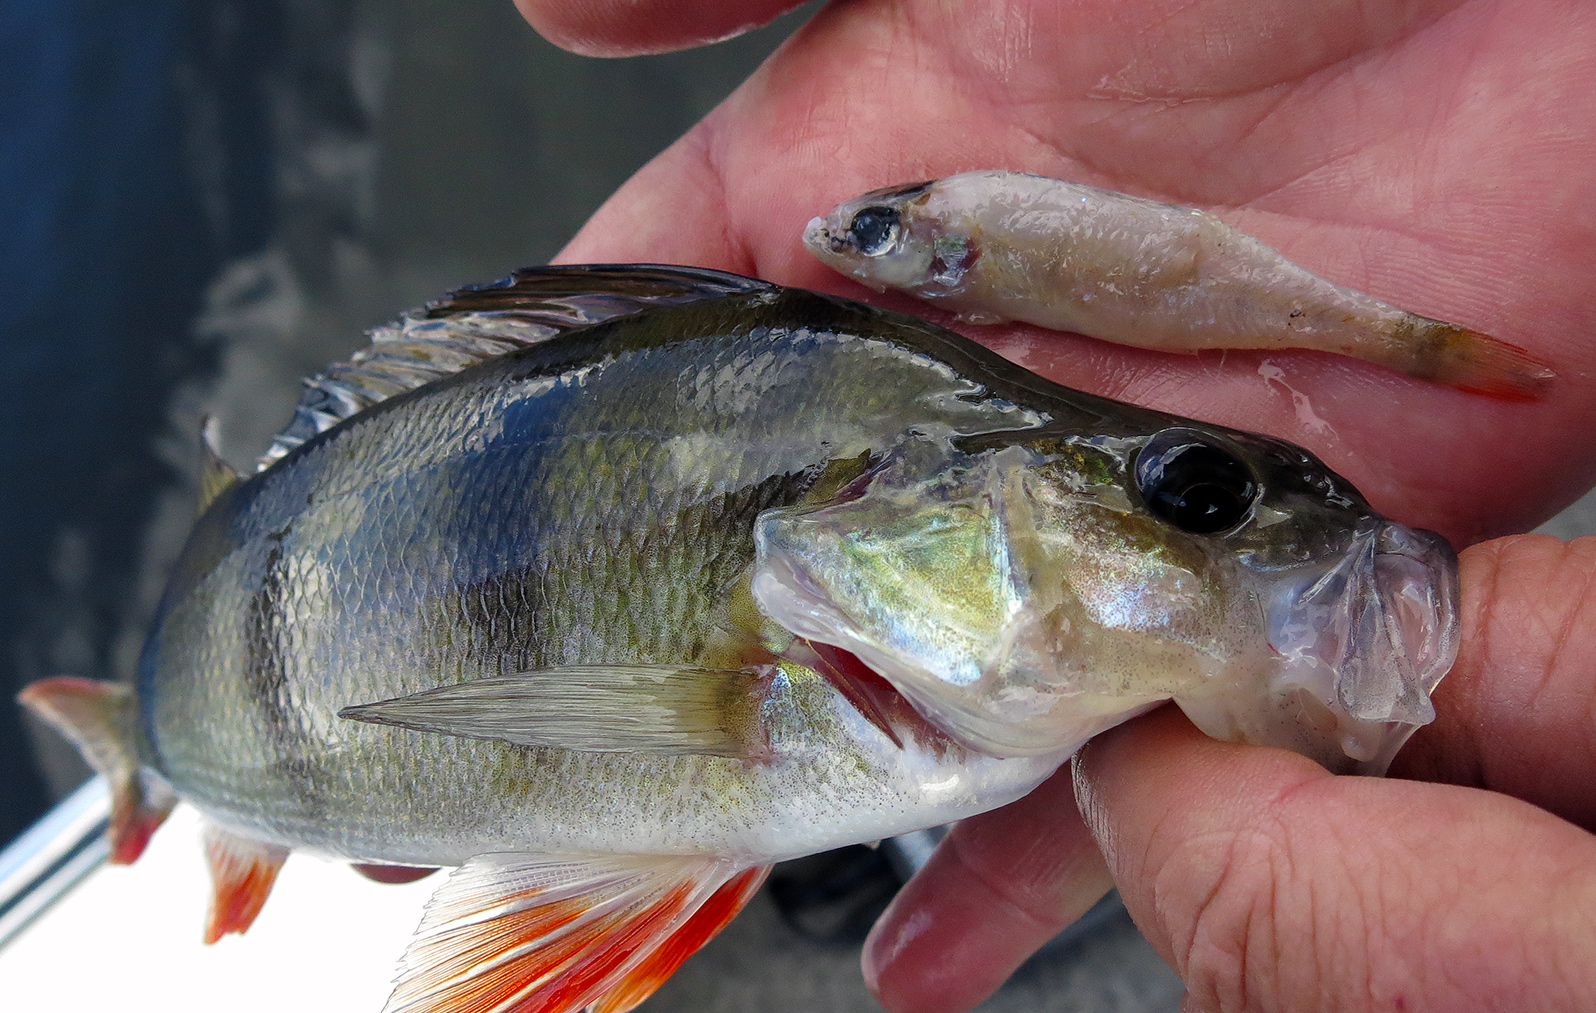 Redfin perch are highly cannibalistic at all sizes.